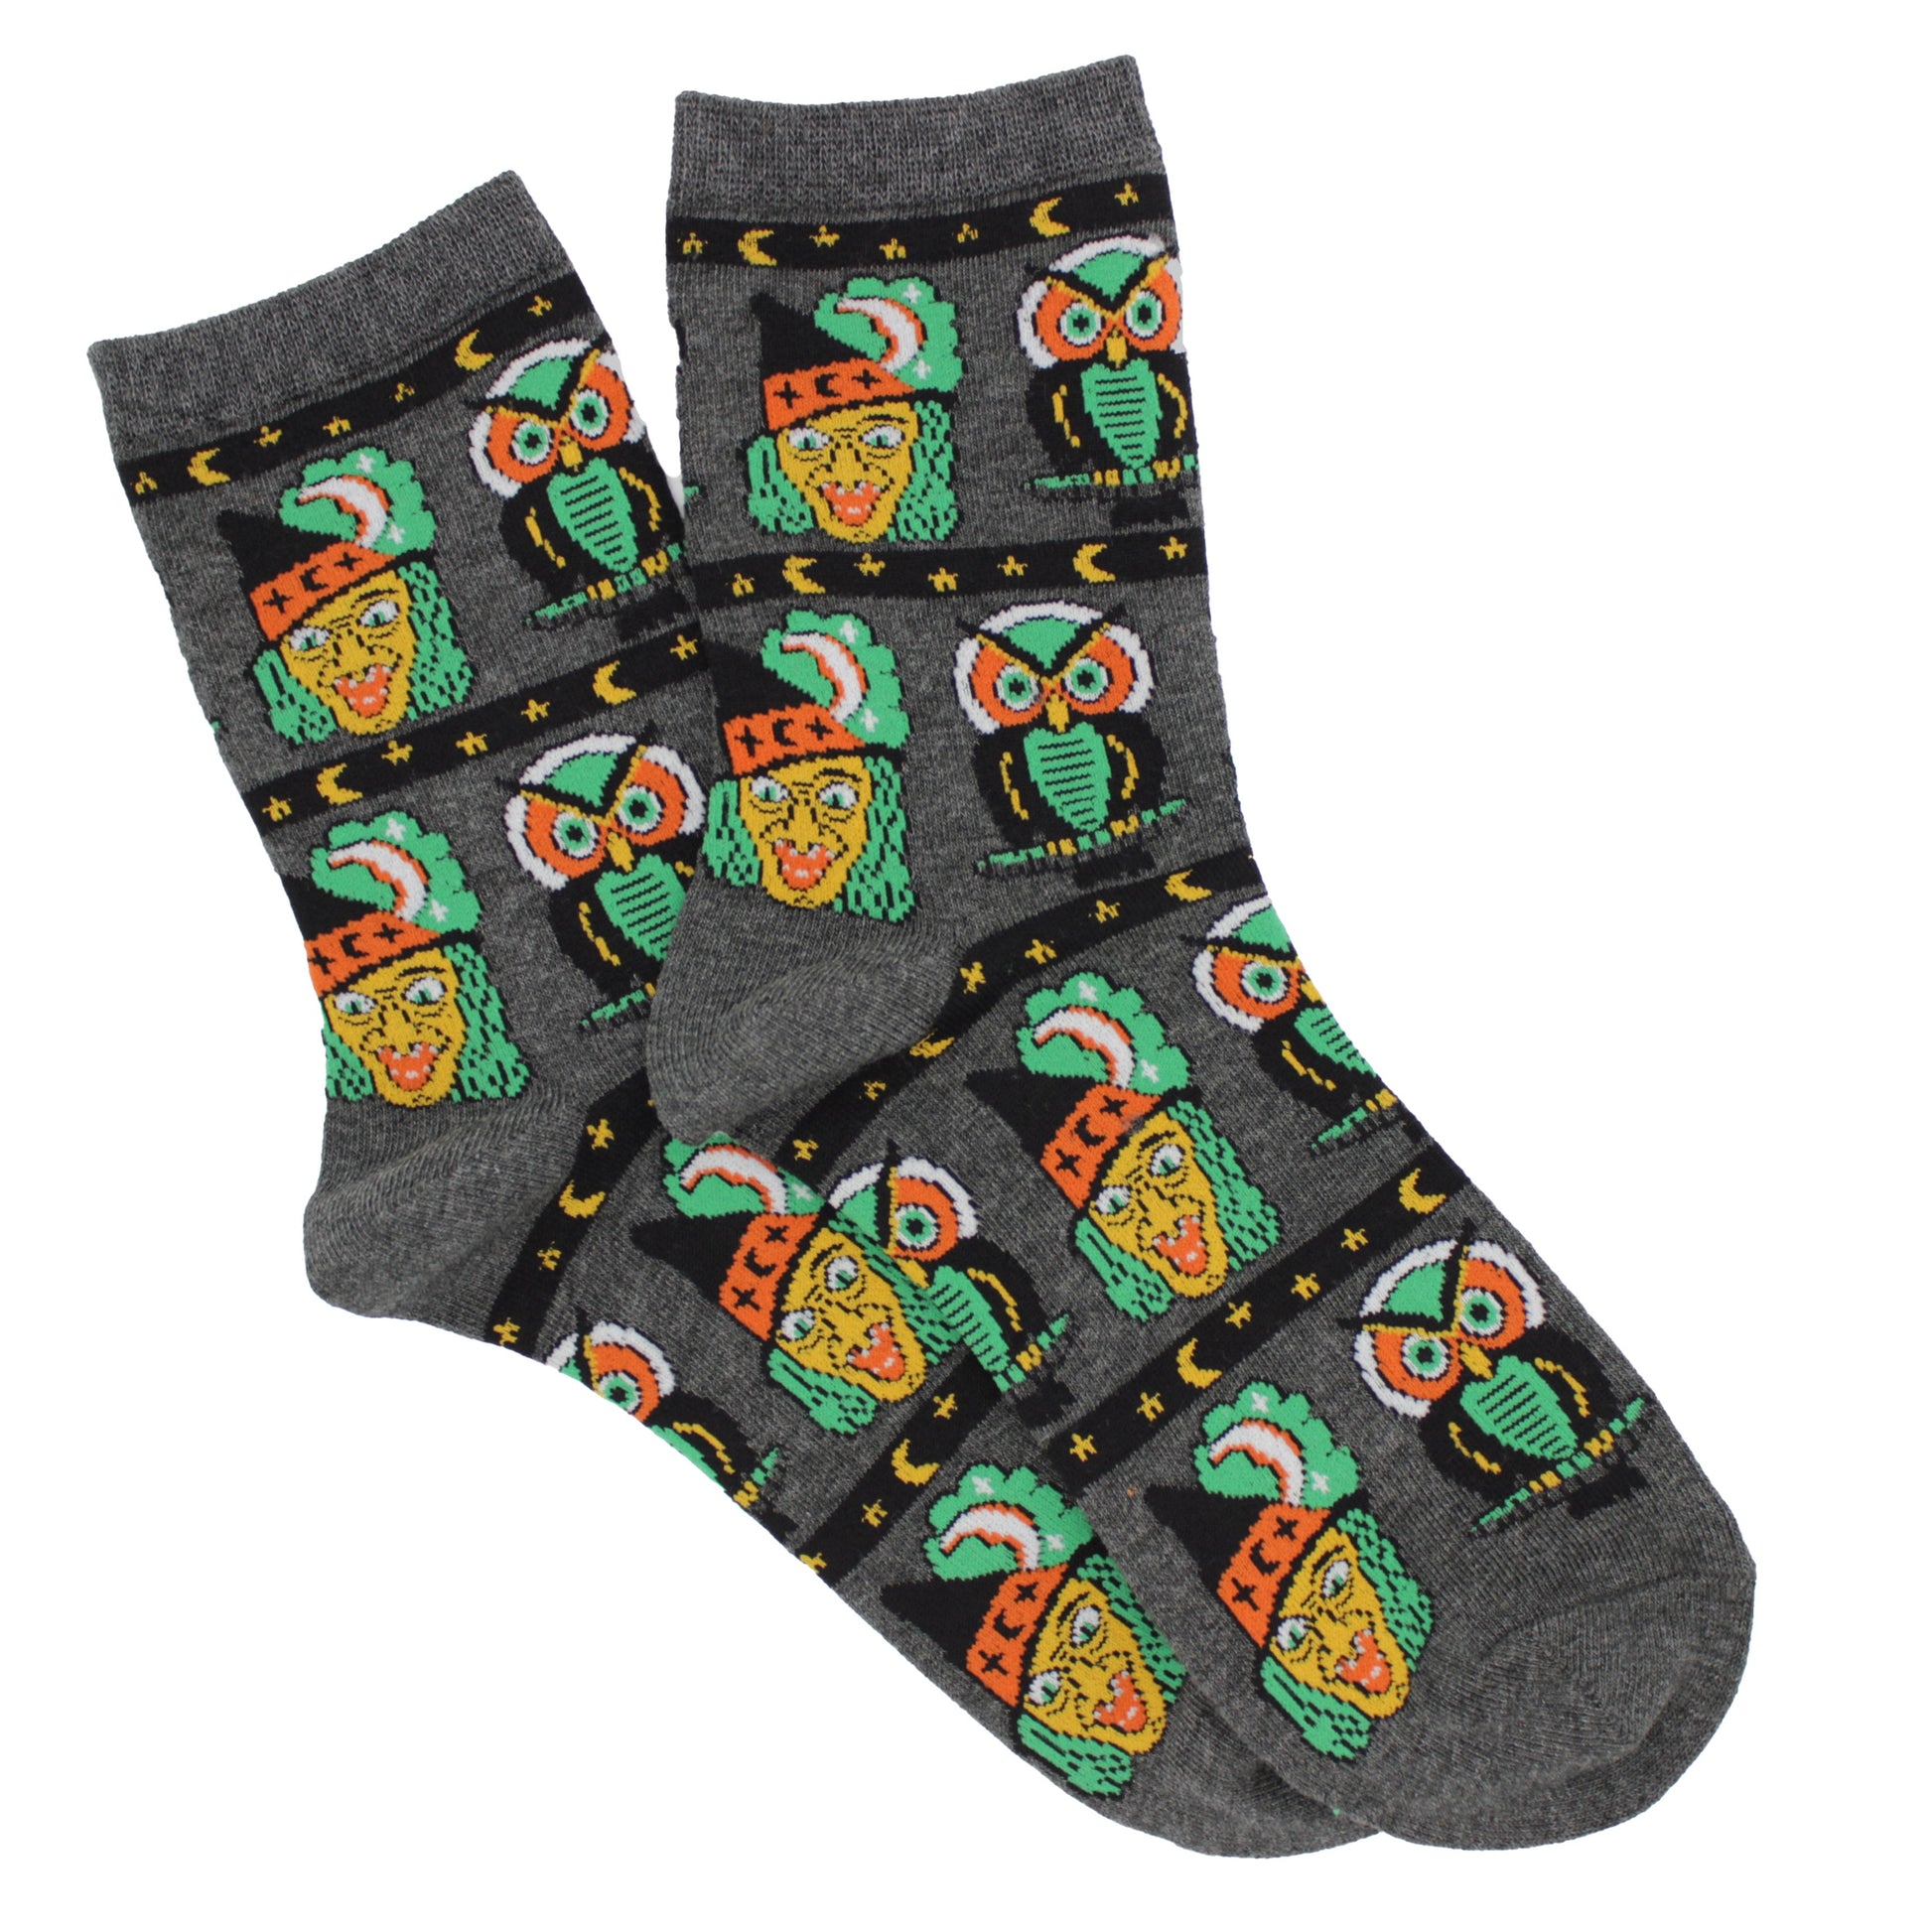 Witch and Owl vintage Halloween socks for women, available at horrorfier.co.uk with free UK postage.